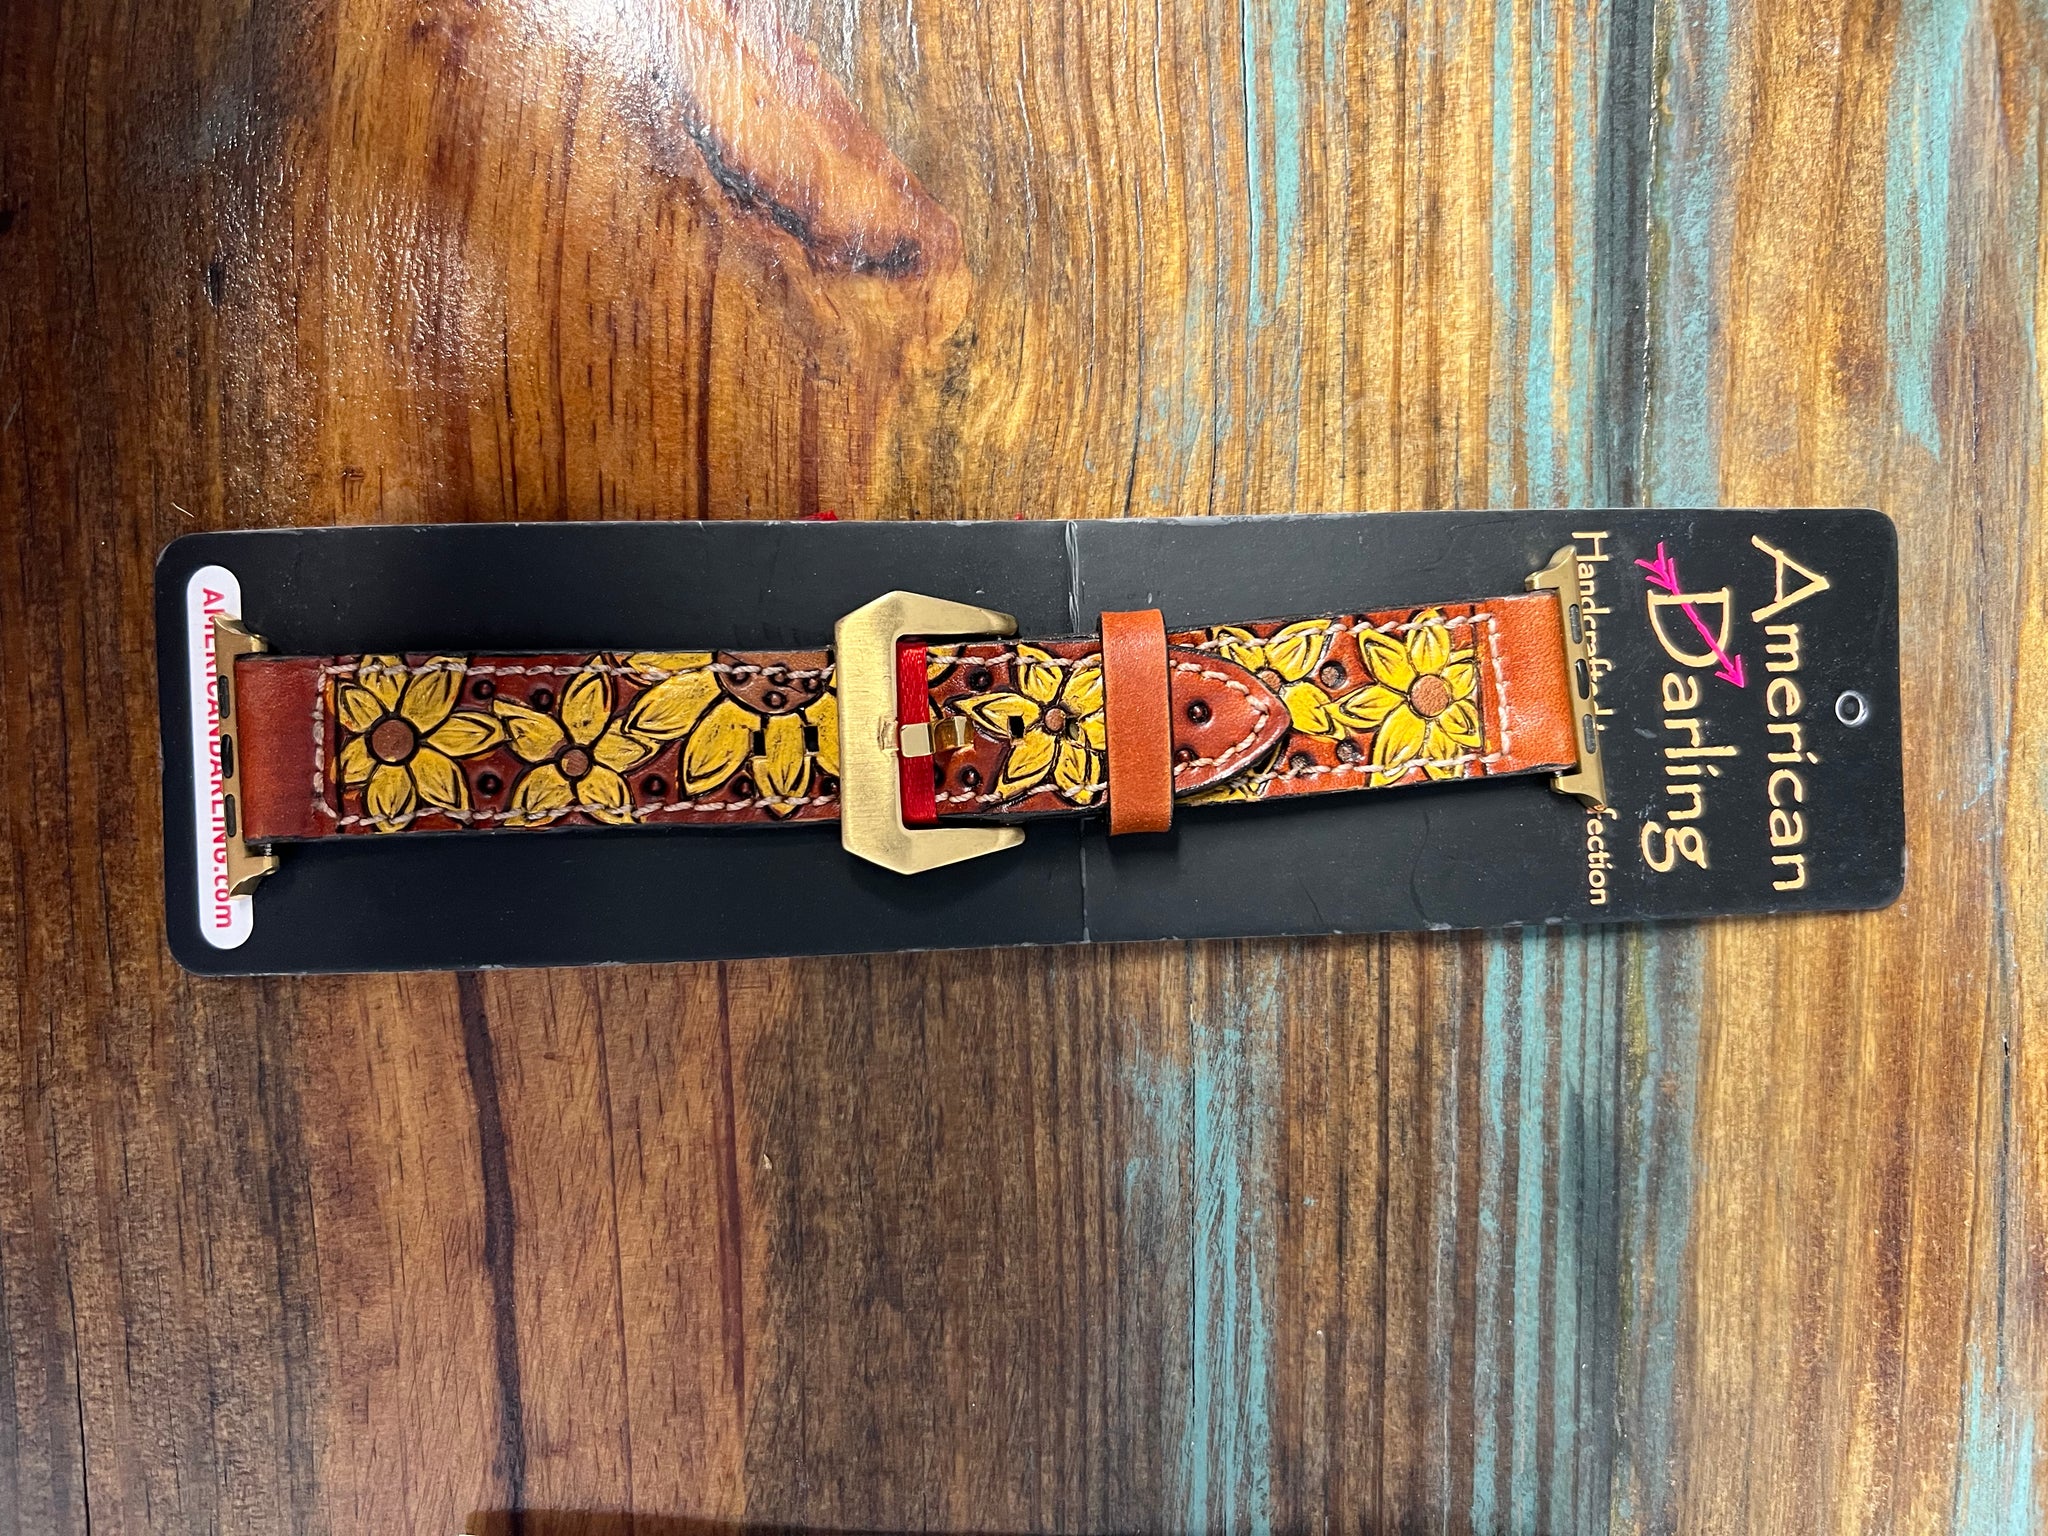 American Darling Leather Apple Watch Bands